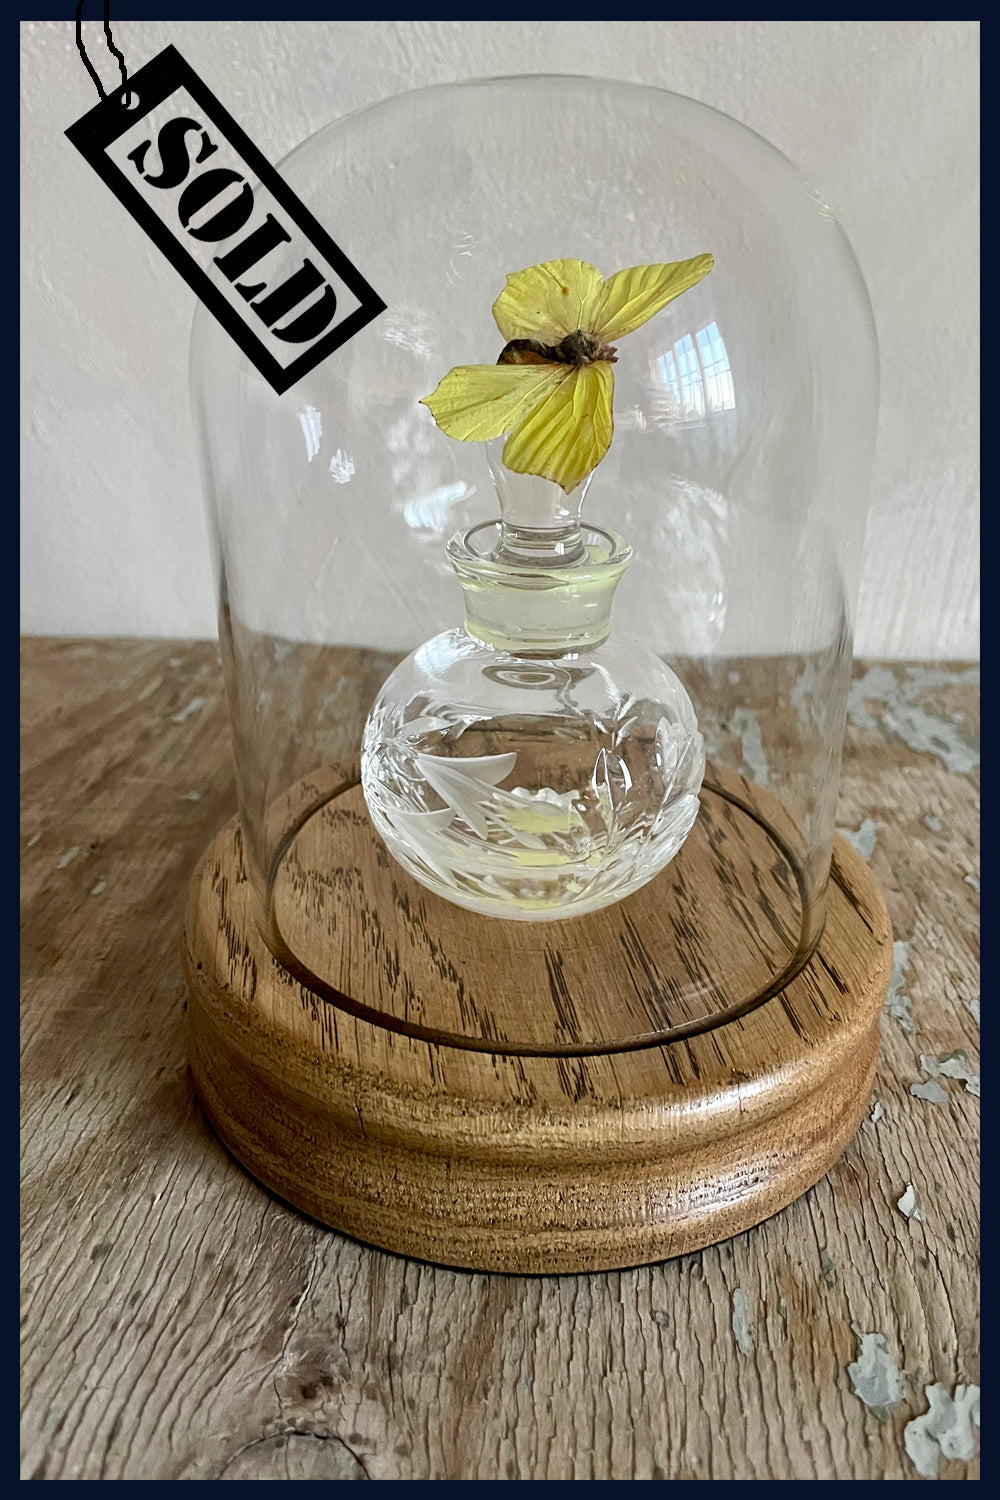 SOLD - Enigma Variations Collection: Vintage Cut-Crystal & Engraved Perfume Bottle with a Vintage Butterfly in a Glass Display Dome